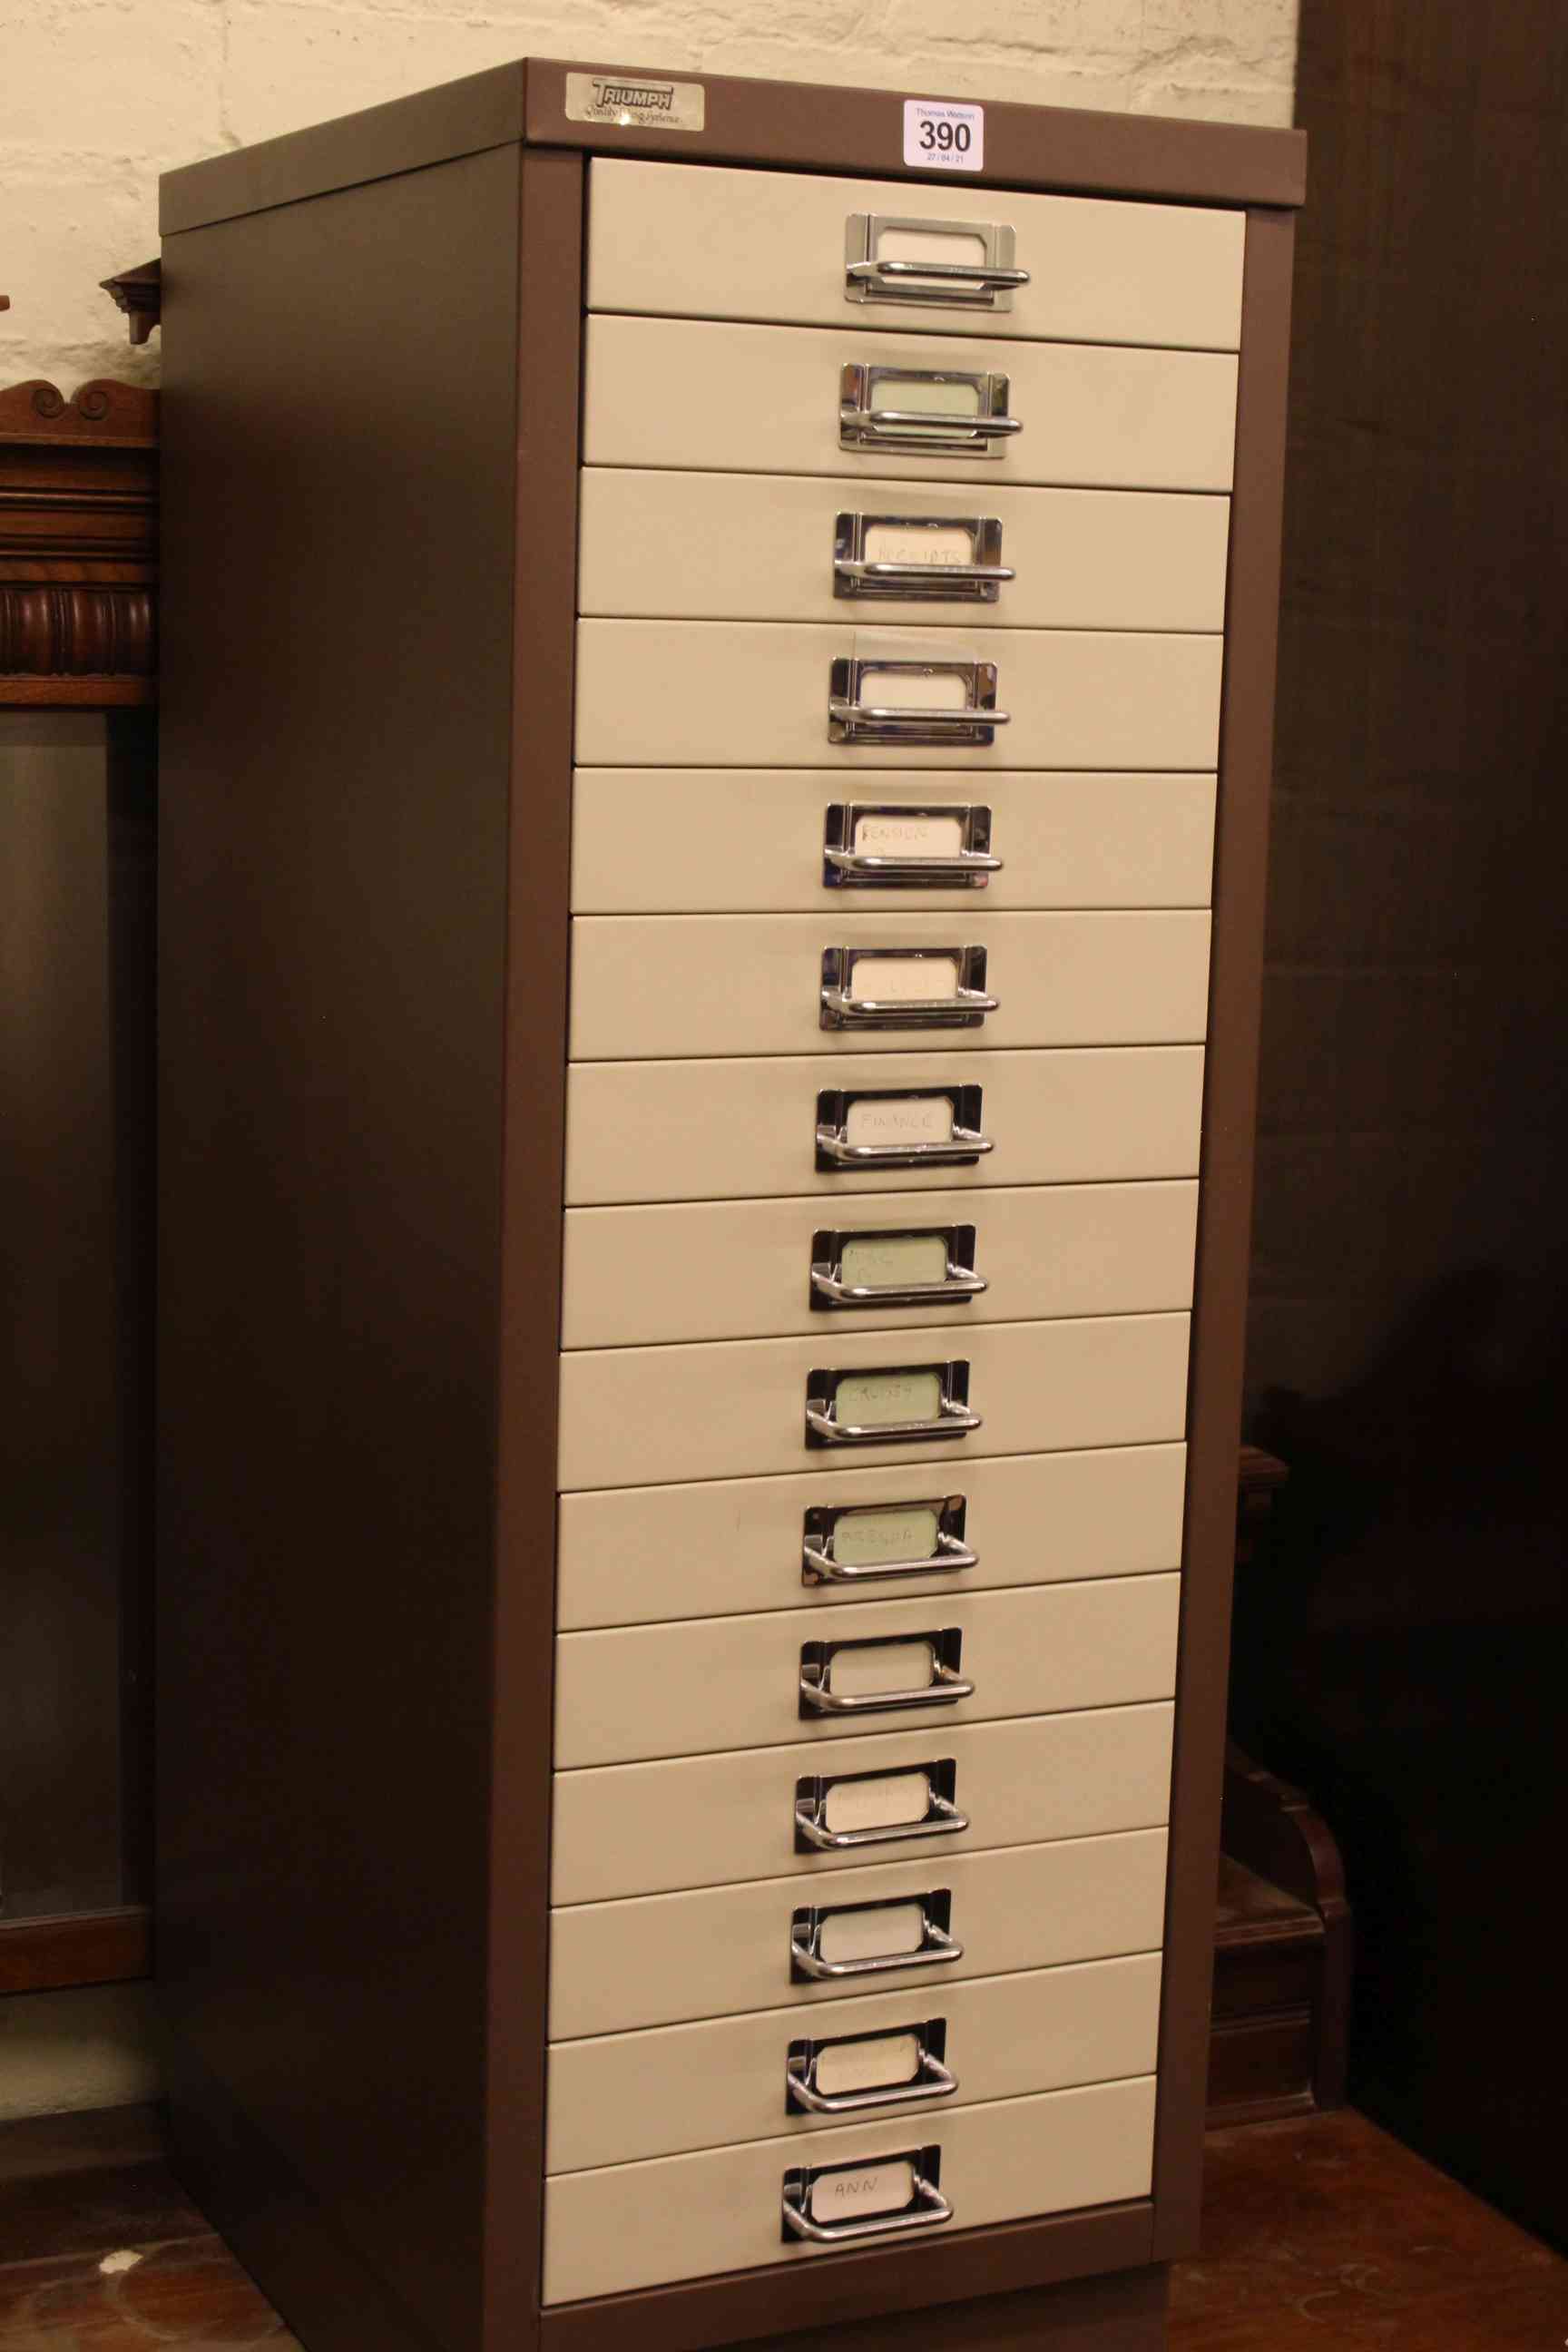 Triumph two tone fifteen drawer index cabinet, 90cm high by 31cm wide by 41cm deep.